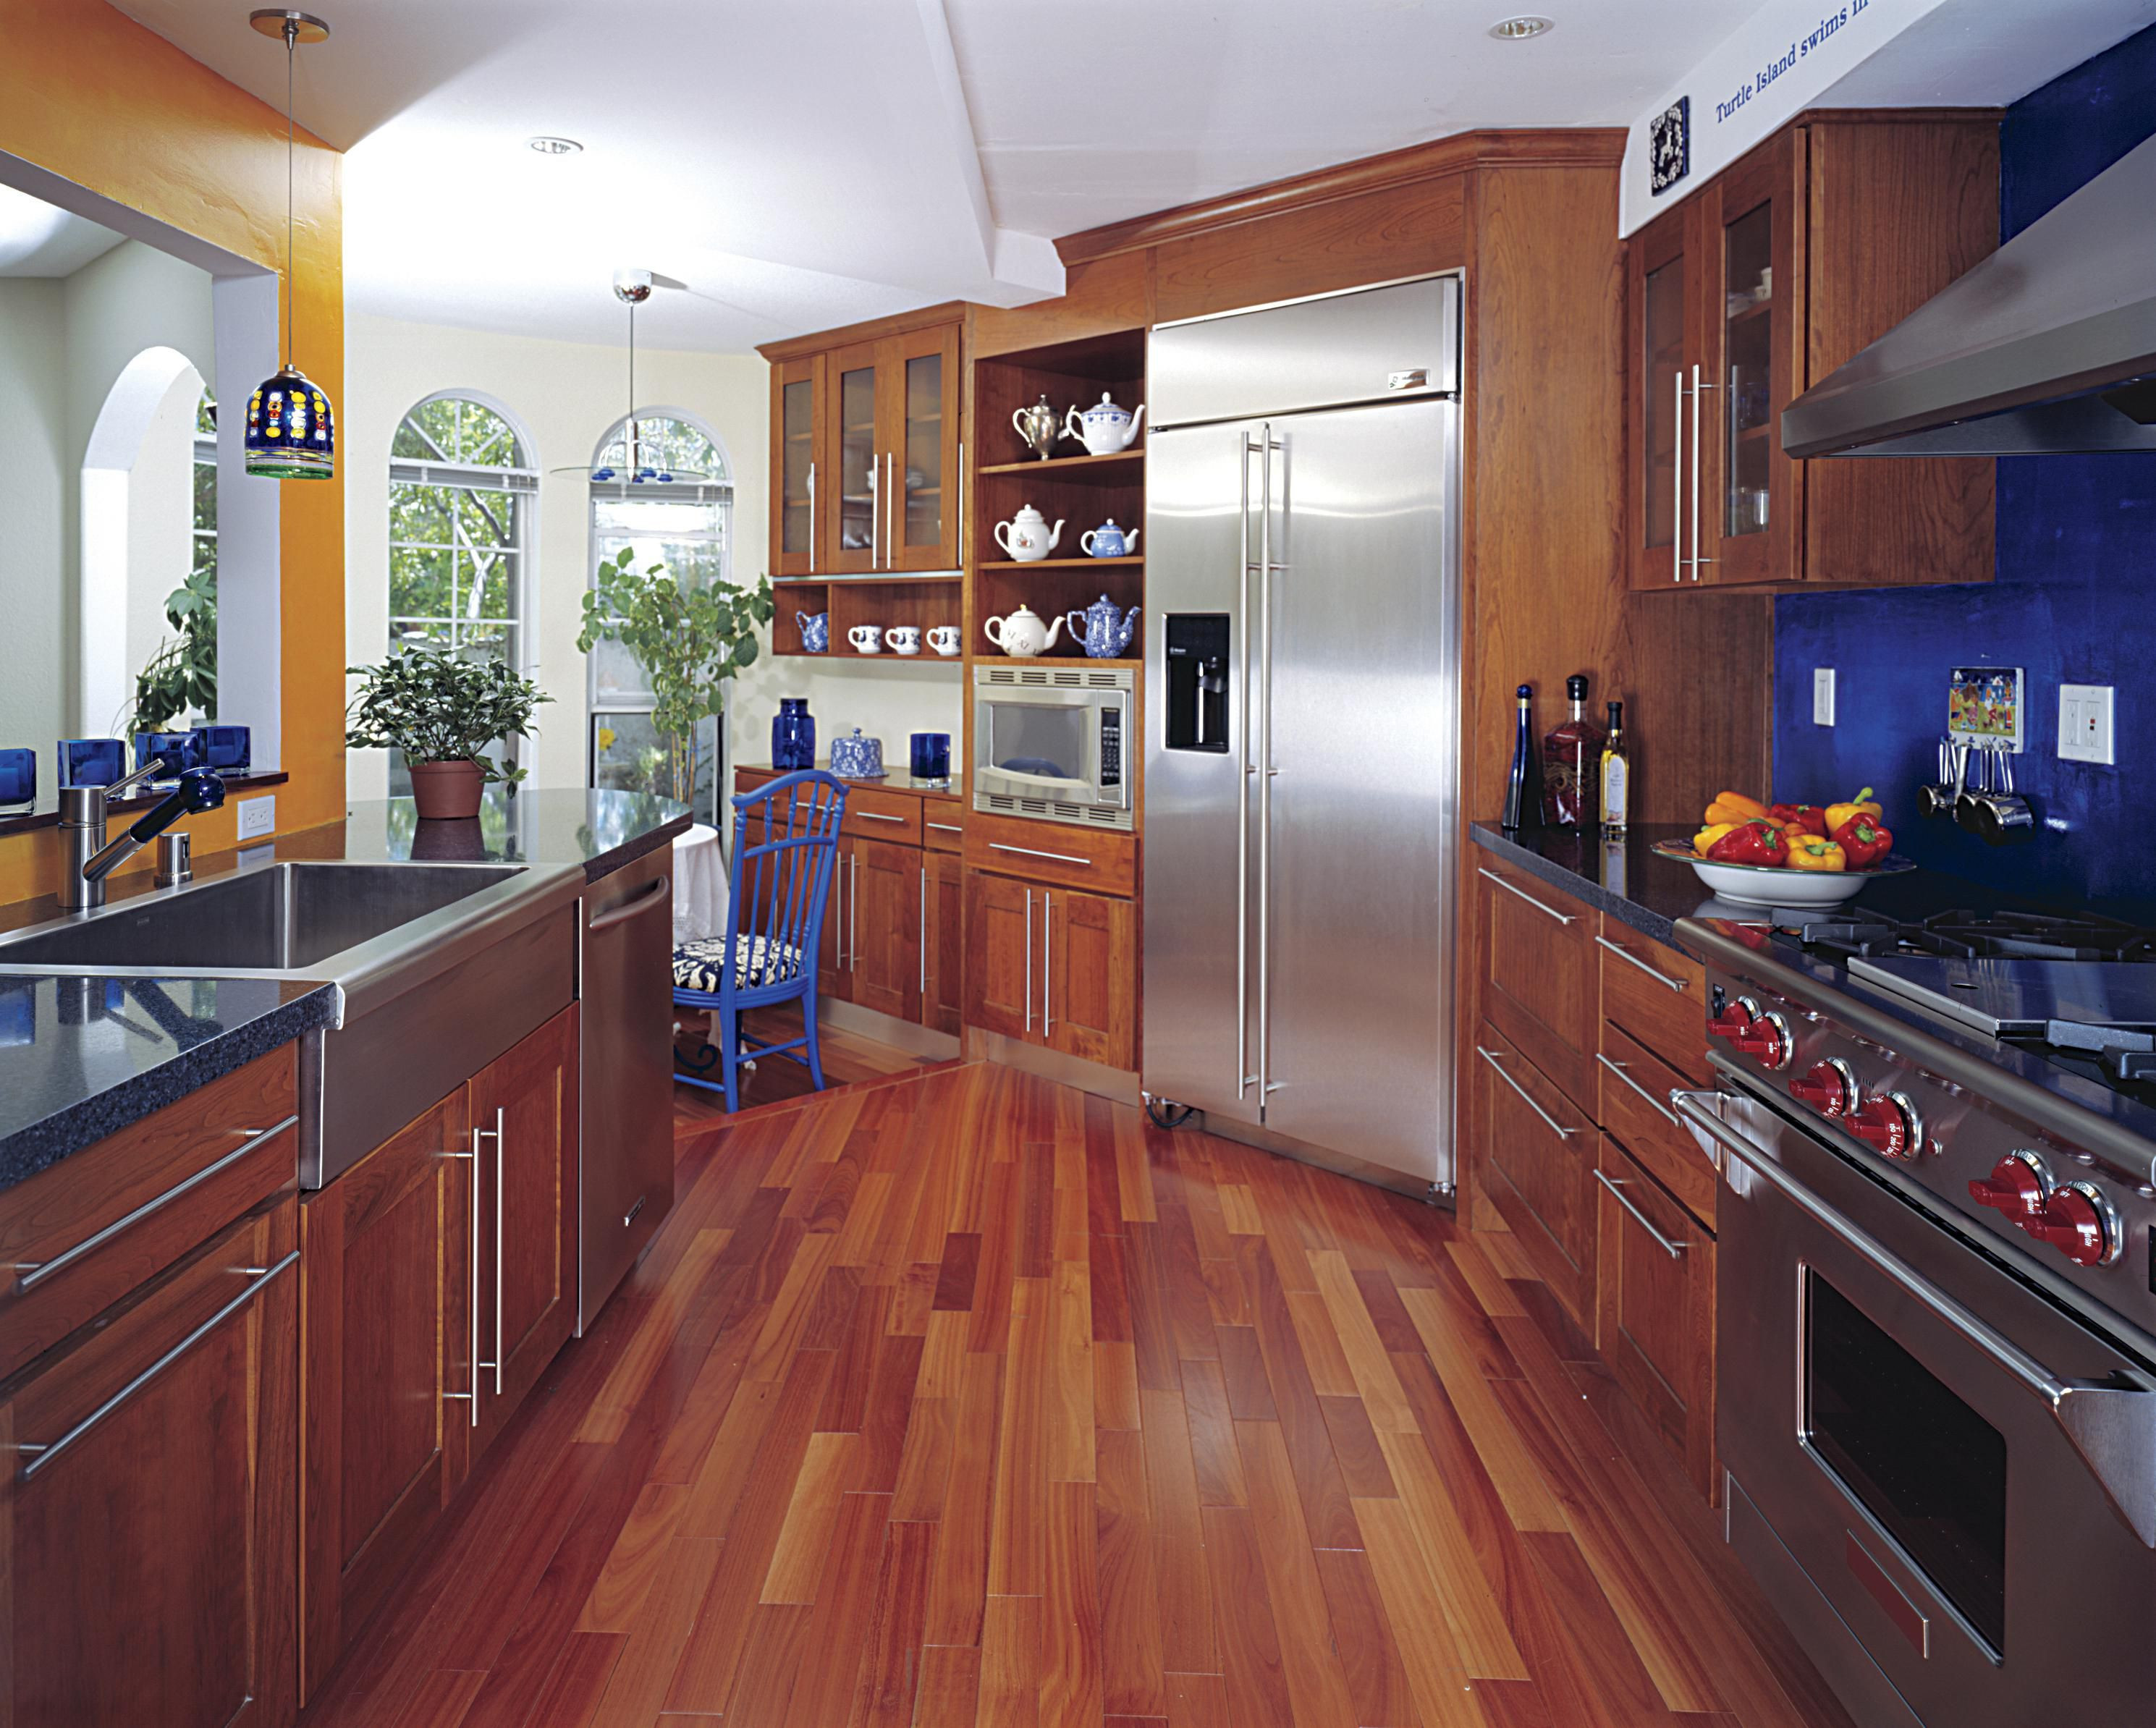 30 Lovable Unfinished Hardwood Flooring Suppliers 2024 free download unfinished hardwood flooring suppliers of hardwood floor in a kitchen is this allowed inside 186828472 56a49f3a5f9b58b7d0d7e142